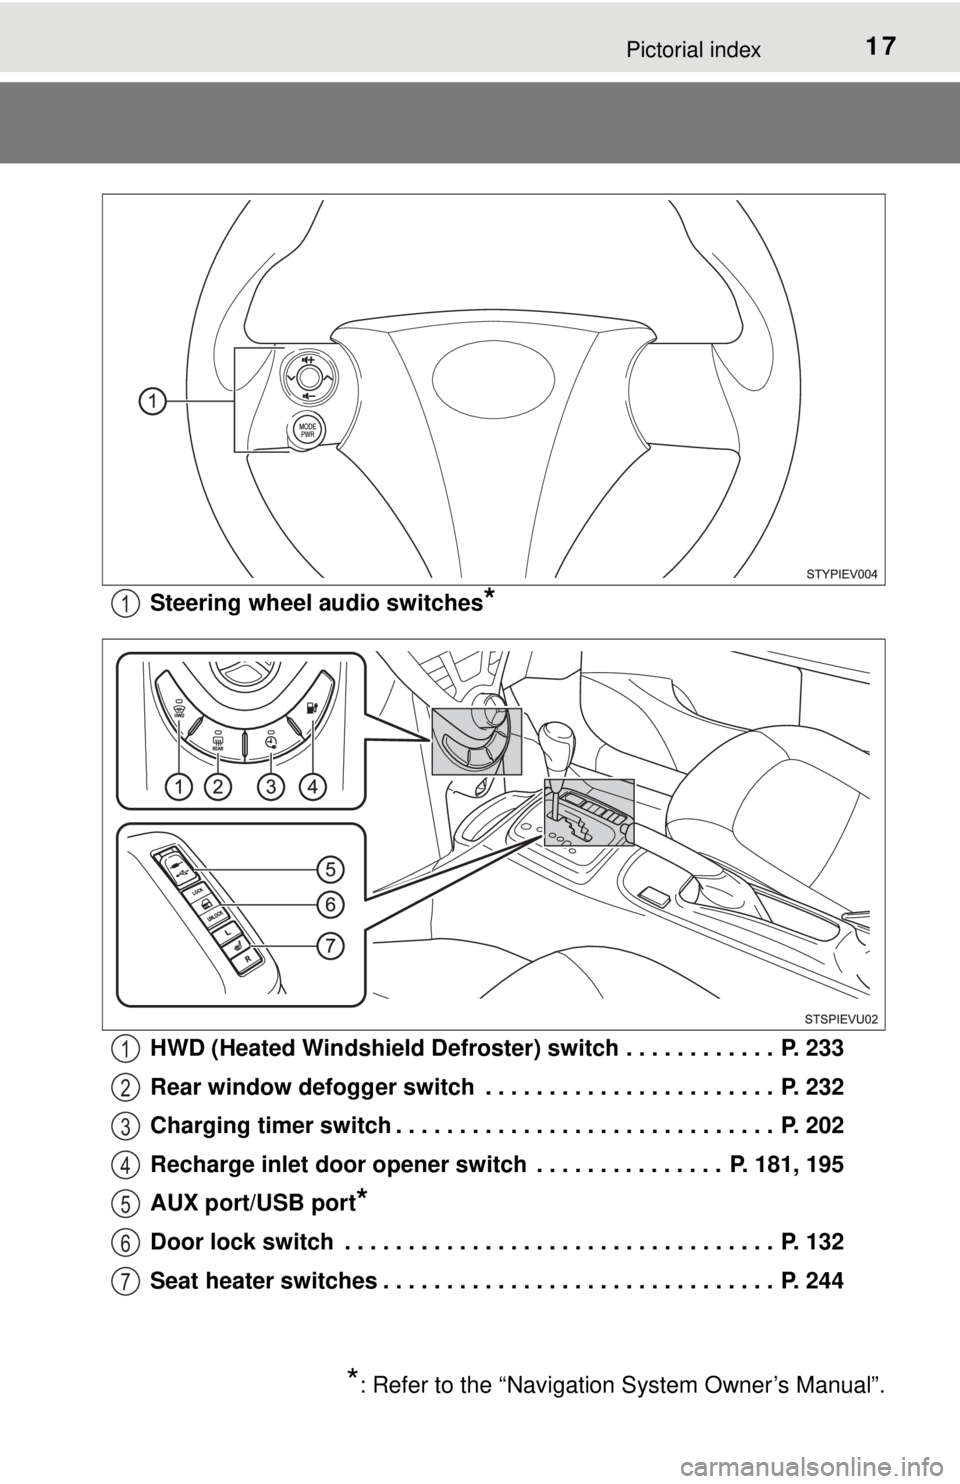 TOYOTA iQ EV 2013  Owners Manual (in English) 17Pictorial index
Steering wheel audio switches*
HWD (Heated Windshield Defroster) switch . . . . . . . . . . . .  P. 233
Rear window defogger switch  . . . . . . . . . . . . . . . . . . . . . . .  P.